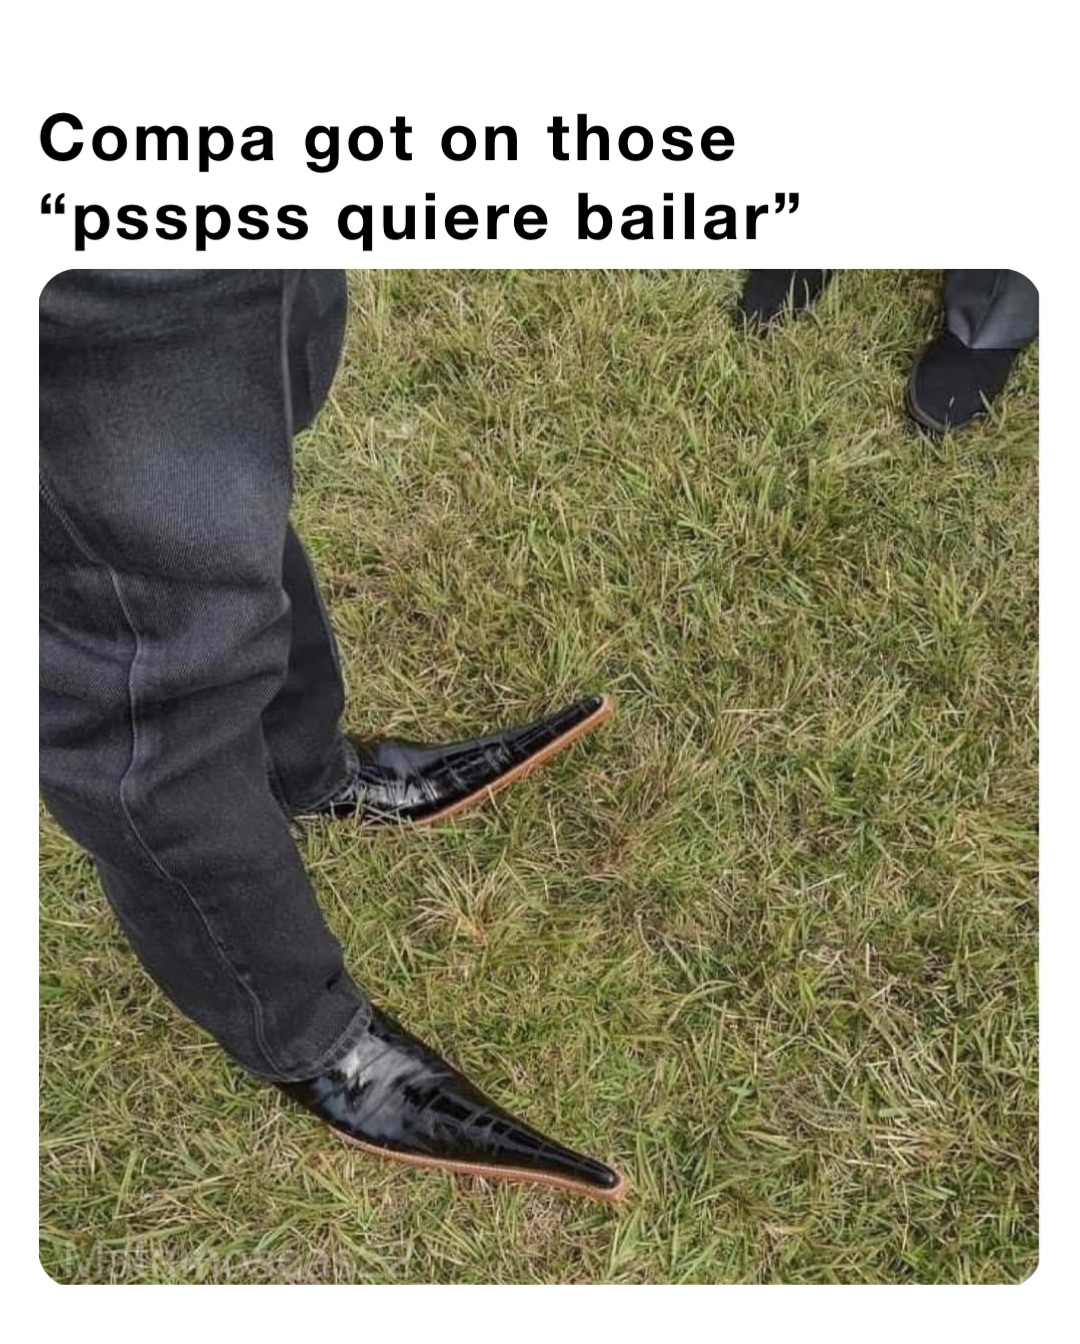 Compa got on those “psspss quiere bailar”